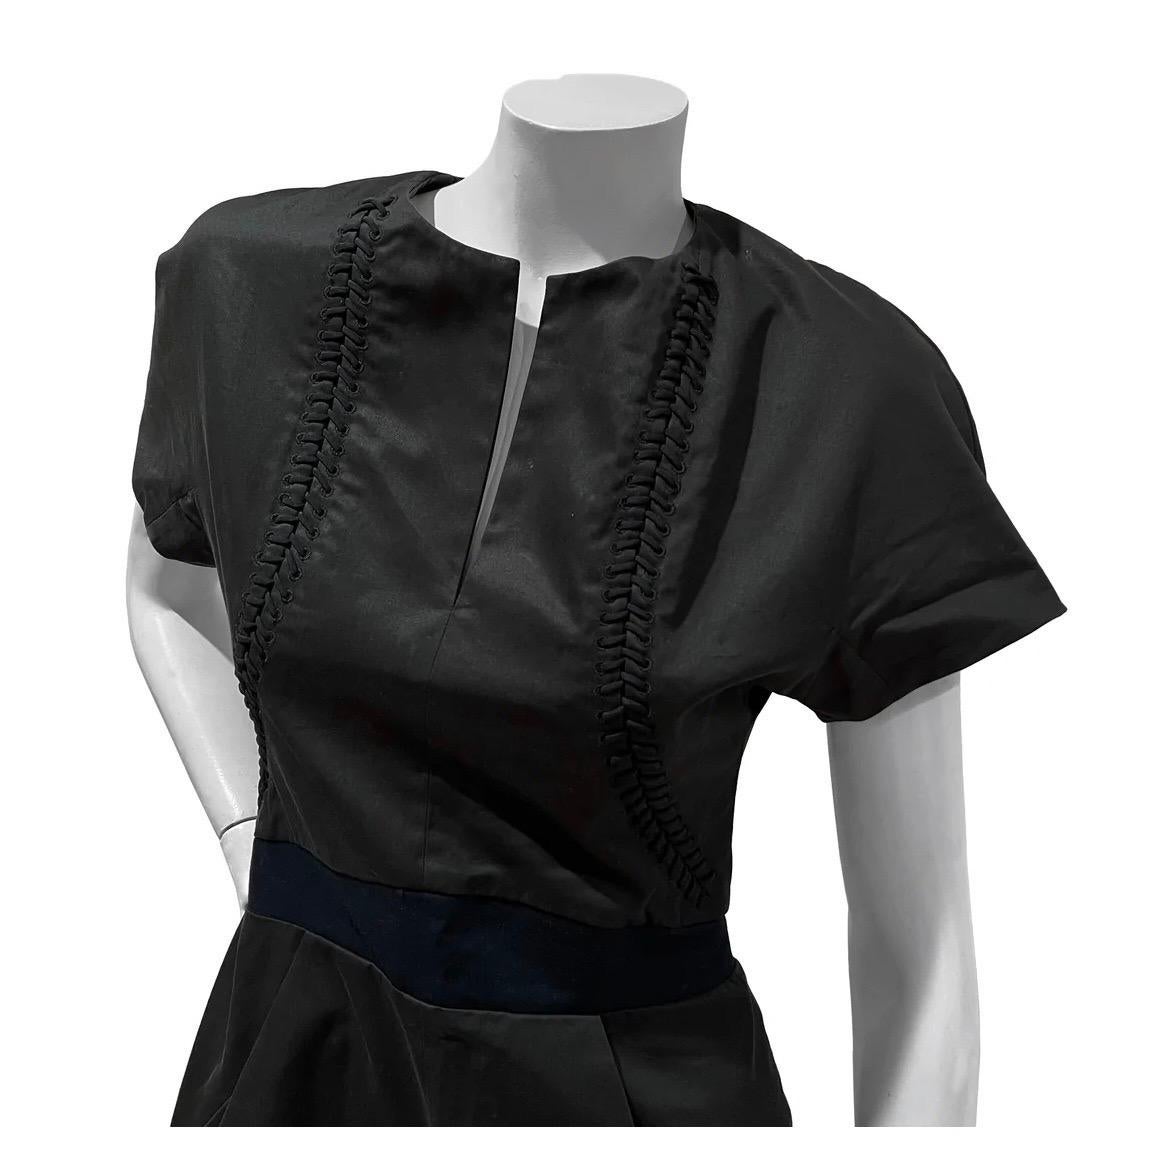 Whipstitch Detail Romper by Balenciaga 
Circa 2007
Made in Italy
Slate gray 
Short sleeves
Center collar slit
Whipstitch detail to waist
Navy blue waist band
Dual front pockets
Dual faux back pockets 
Back zip closure
Fold over cuff hem  
Fabric